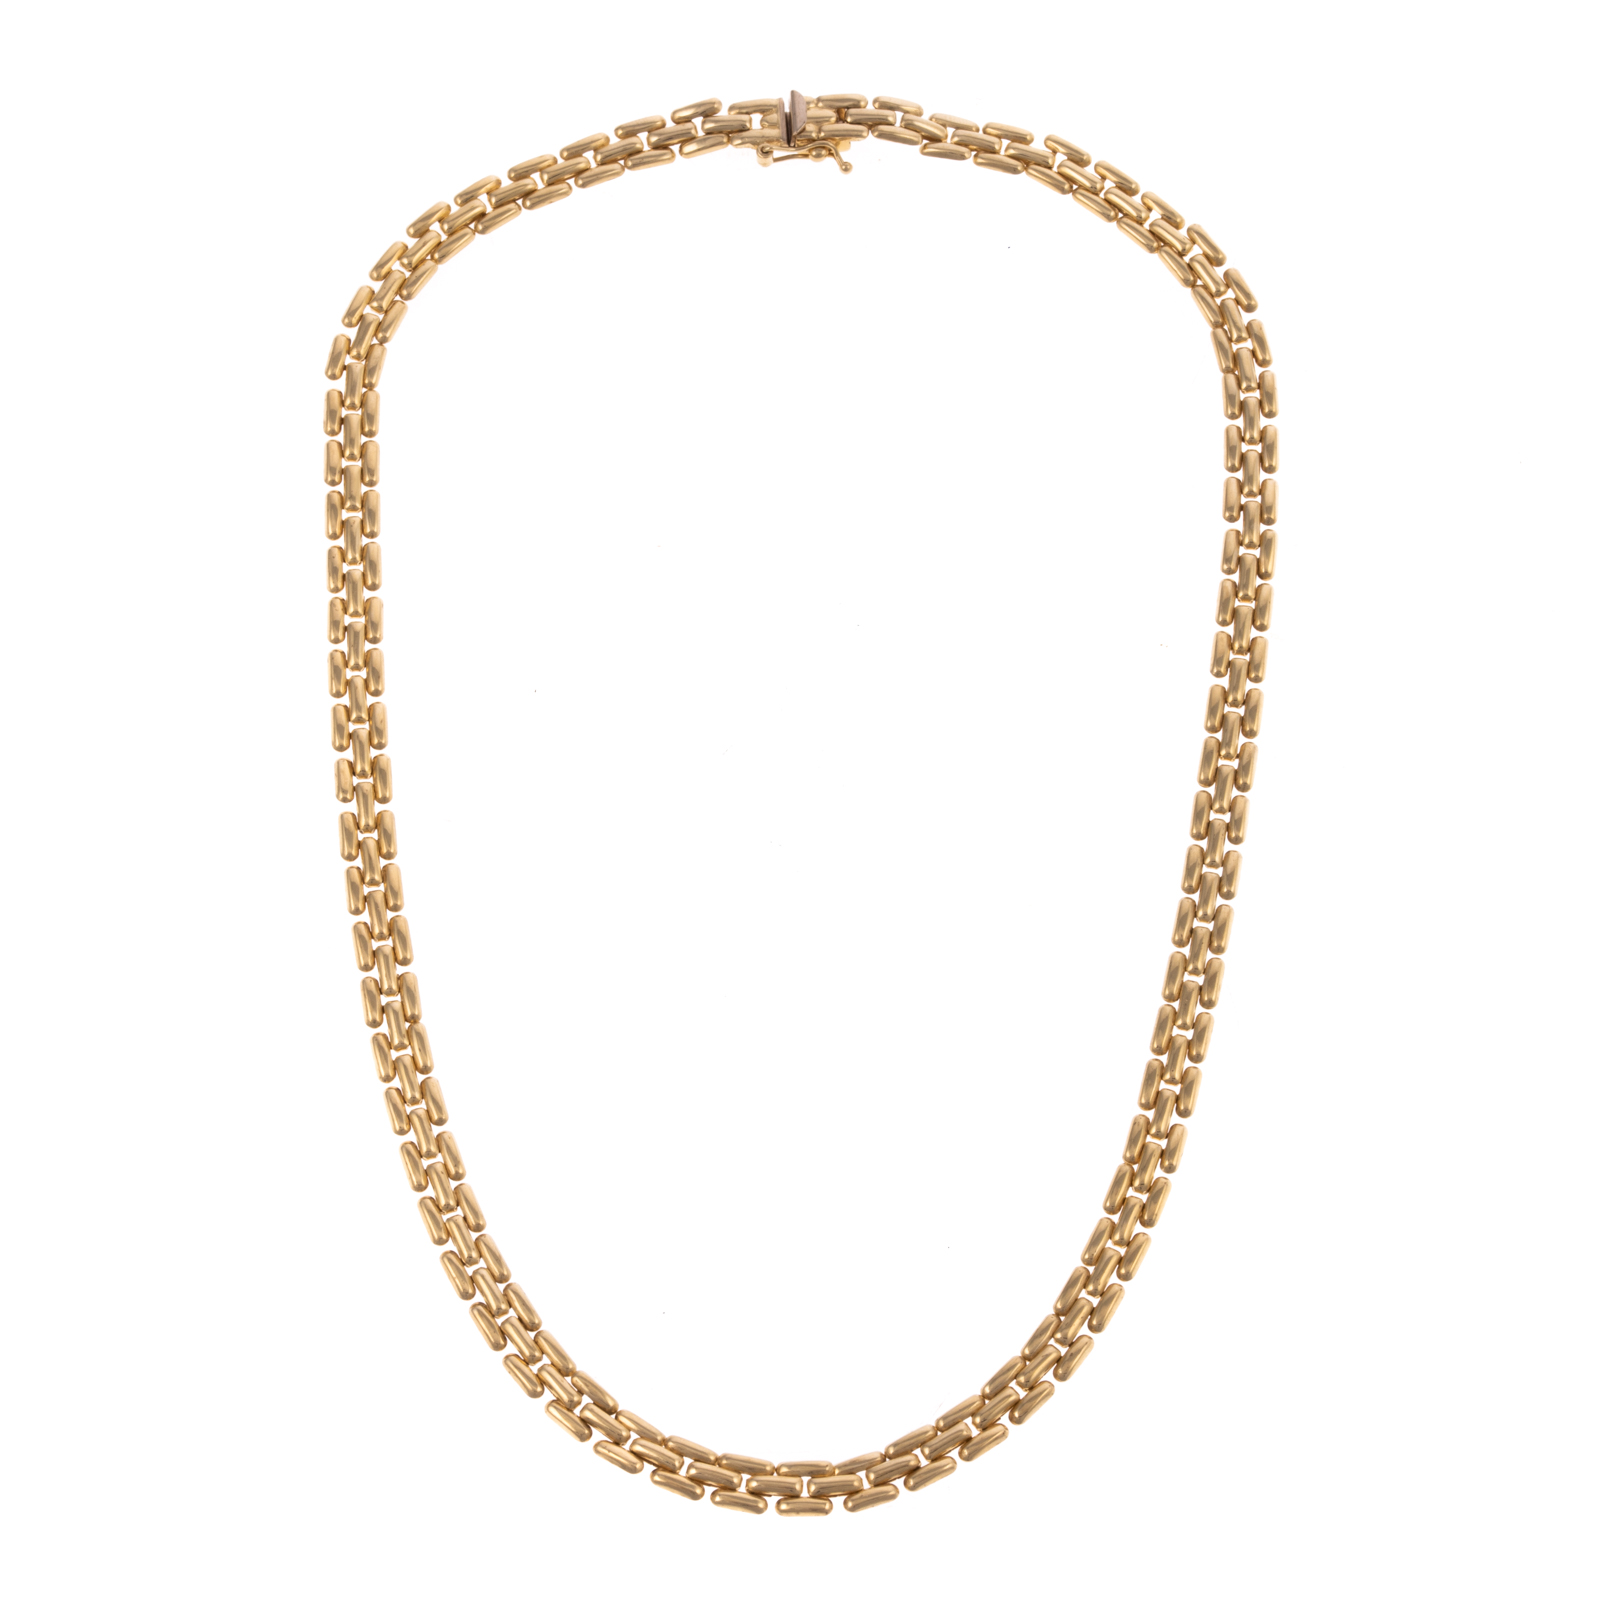 A PANTHER-LINK NECKLACE IN 18K